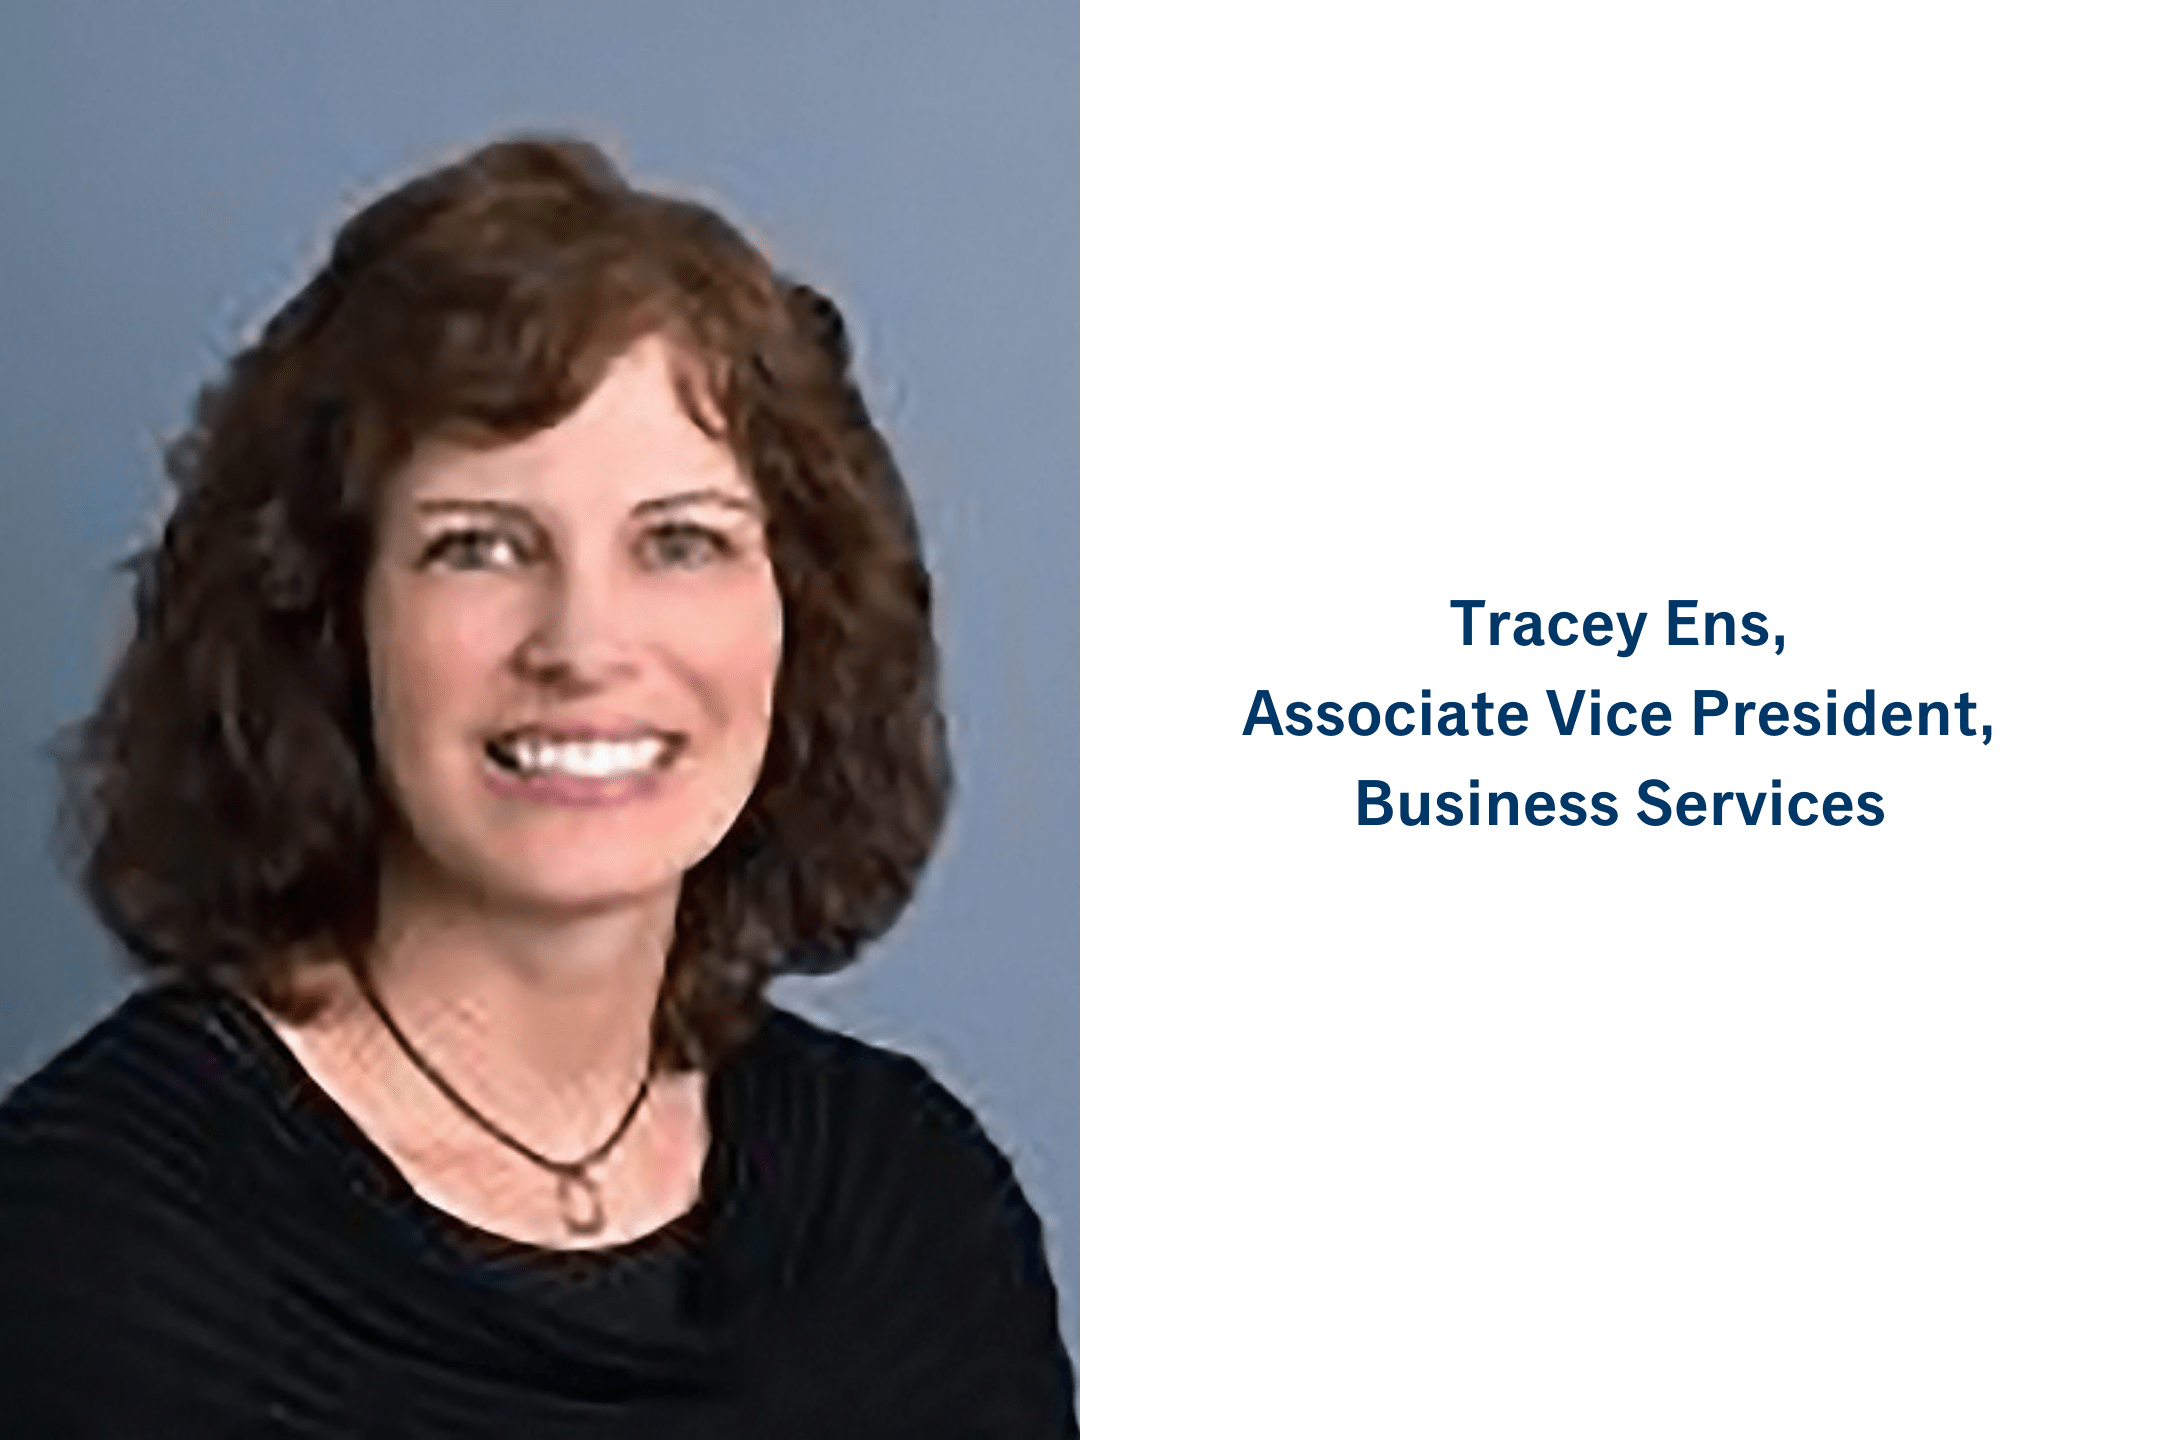 Tracey Ens, Associate Vice President, Business Services